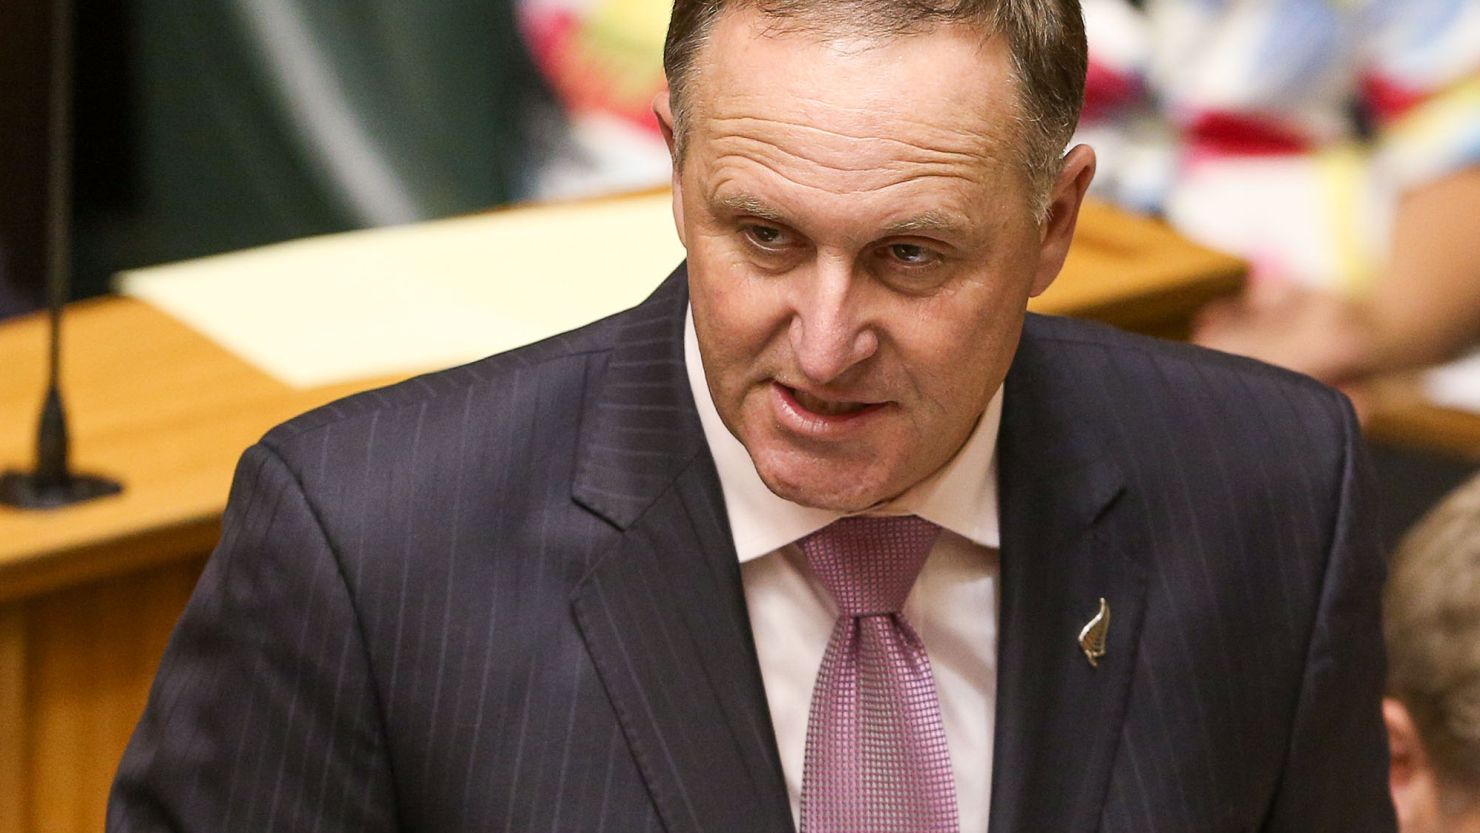 NZ Prime Minister John Key said the decision to deploy personnel to Iraq had not been taken lightly.